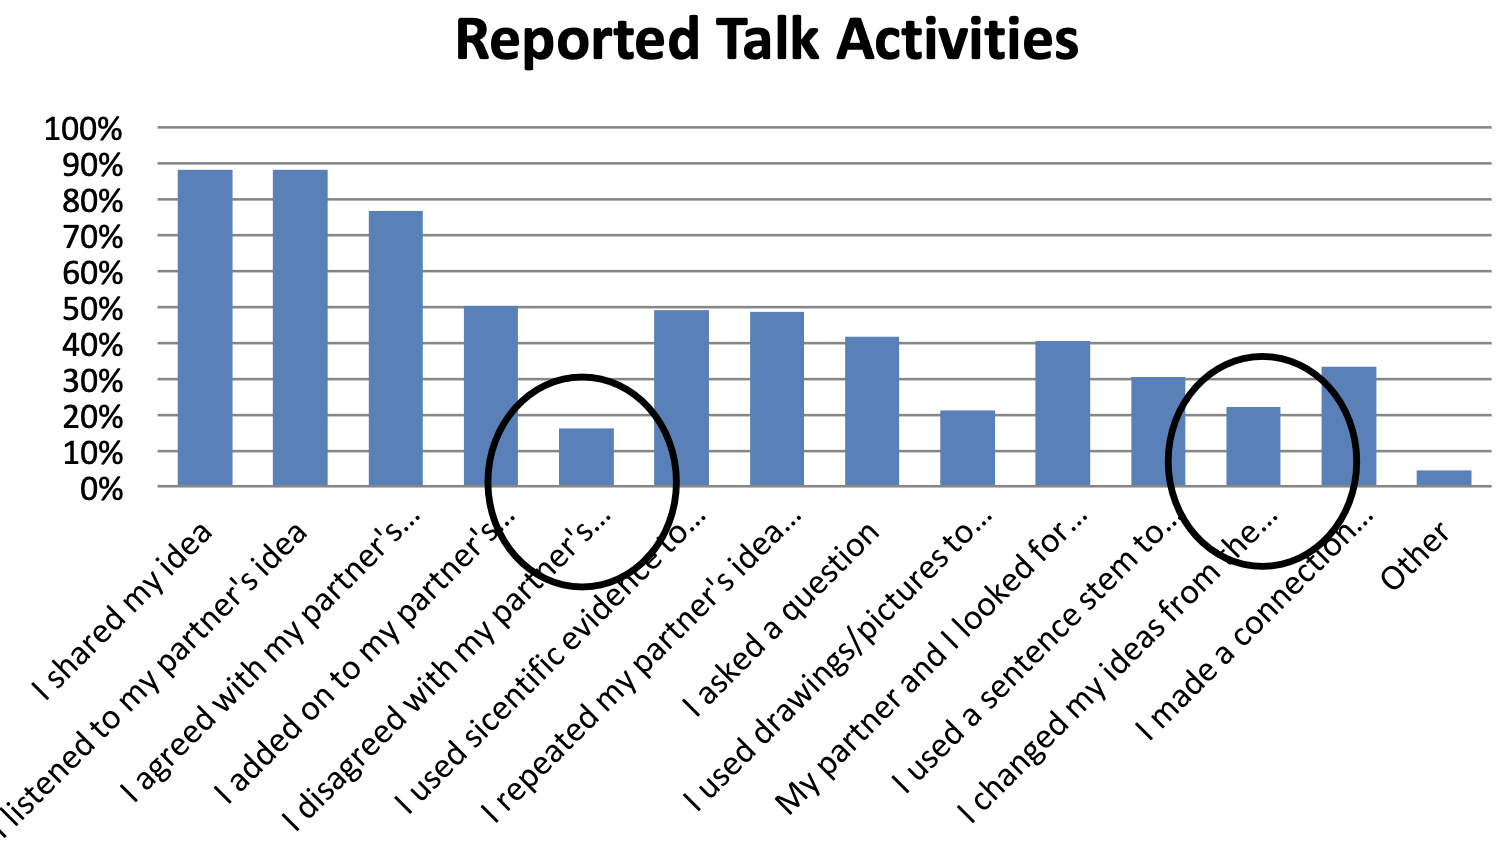 A bar chart of reported talk ideas. The highest two values are "I shared my idea" and "I listened to my partner's idea" at almost 90%, and the lowest value is "other" being close to about 5%. "I disagreed with my partner's..." and "I changed my ideas from the..." are both circled on the bar graph. 